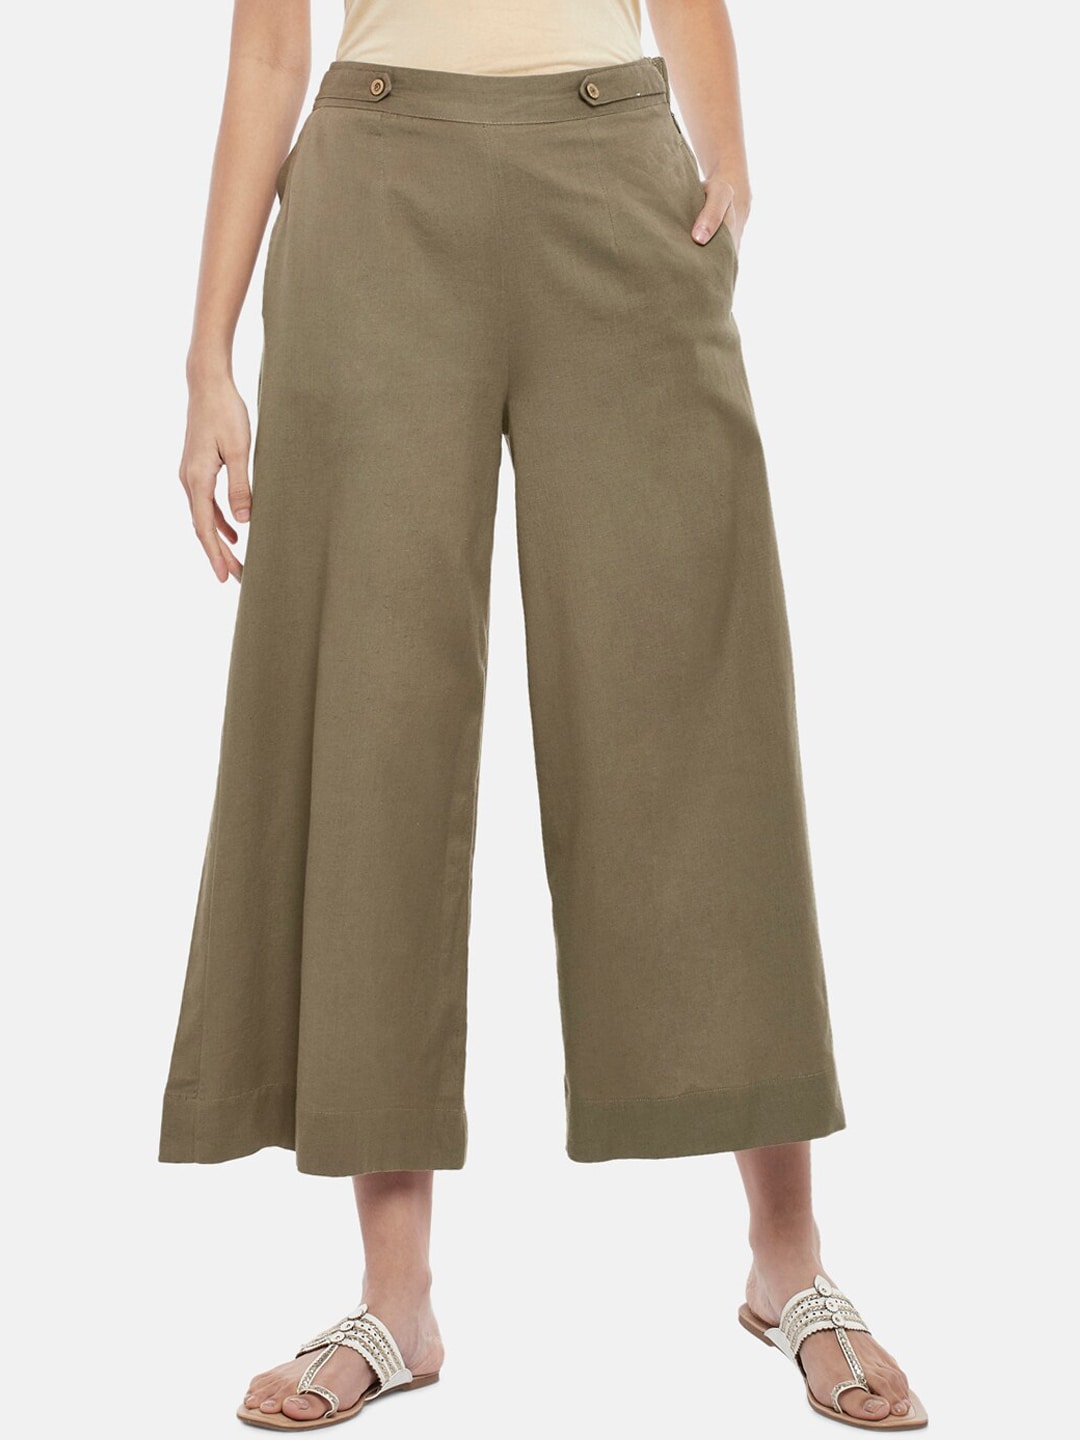 AKKRITI BY PANTALOONS Women Olive Green Solid Cotton Culottes Price in India